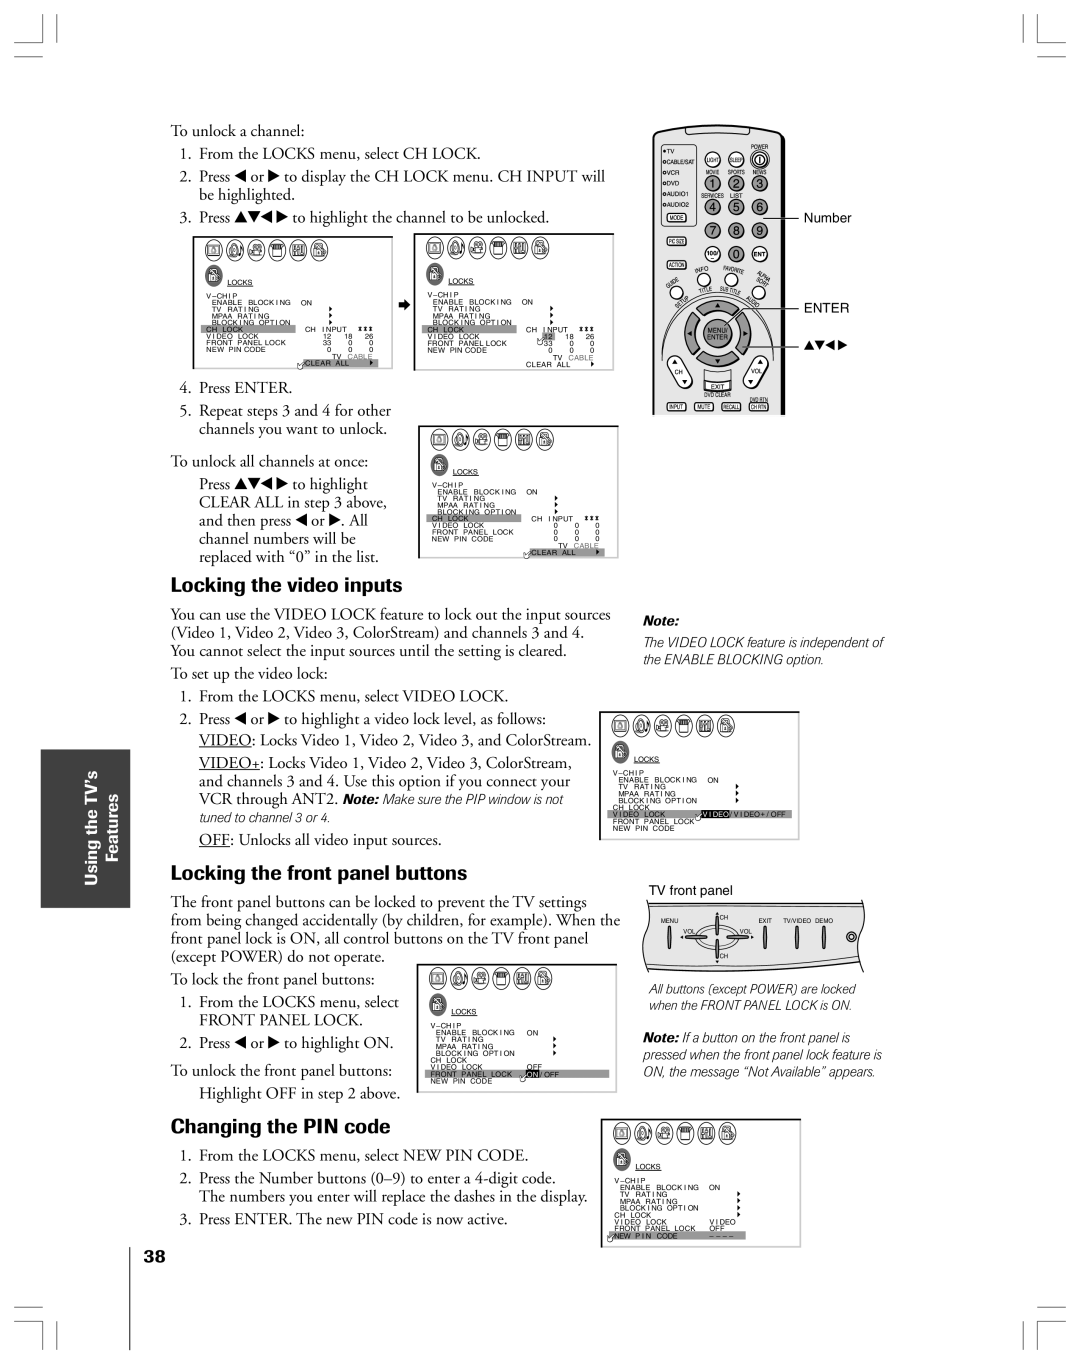 Toshiba 53AX62 owner manual Locking the video inputs, Locking the front panel buttons, Changing the PIN code 